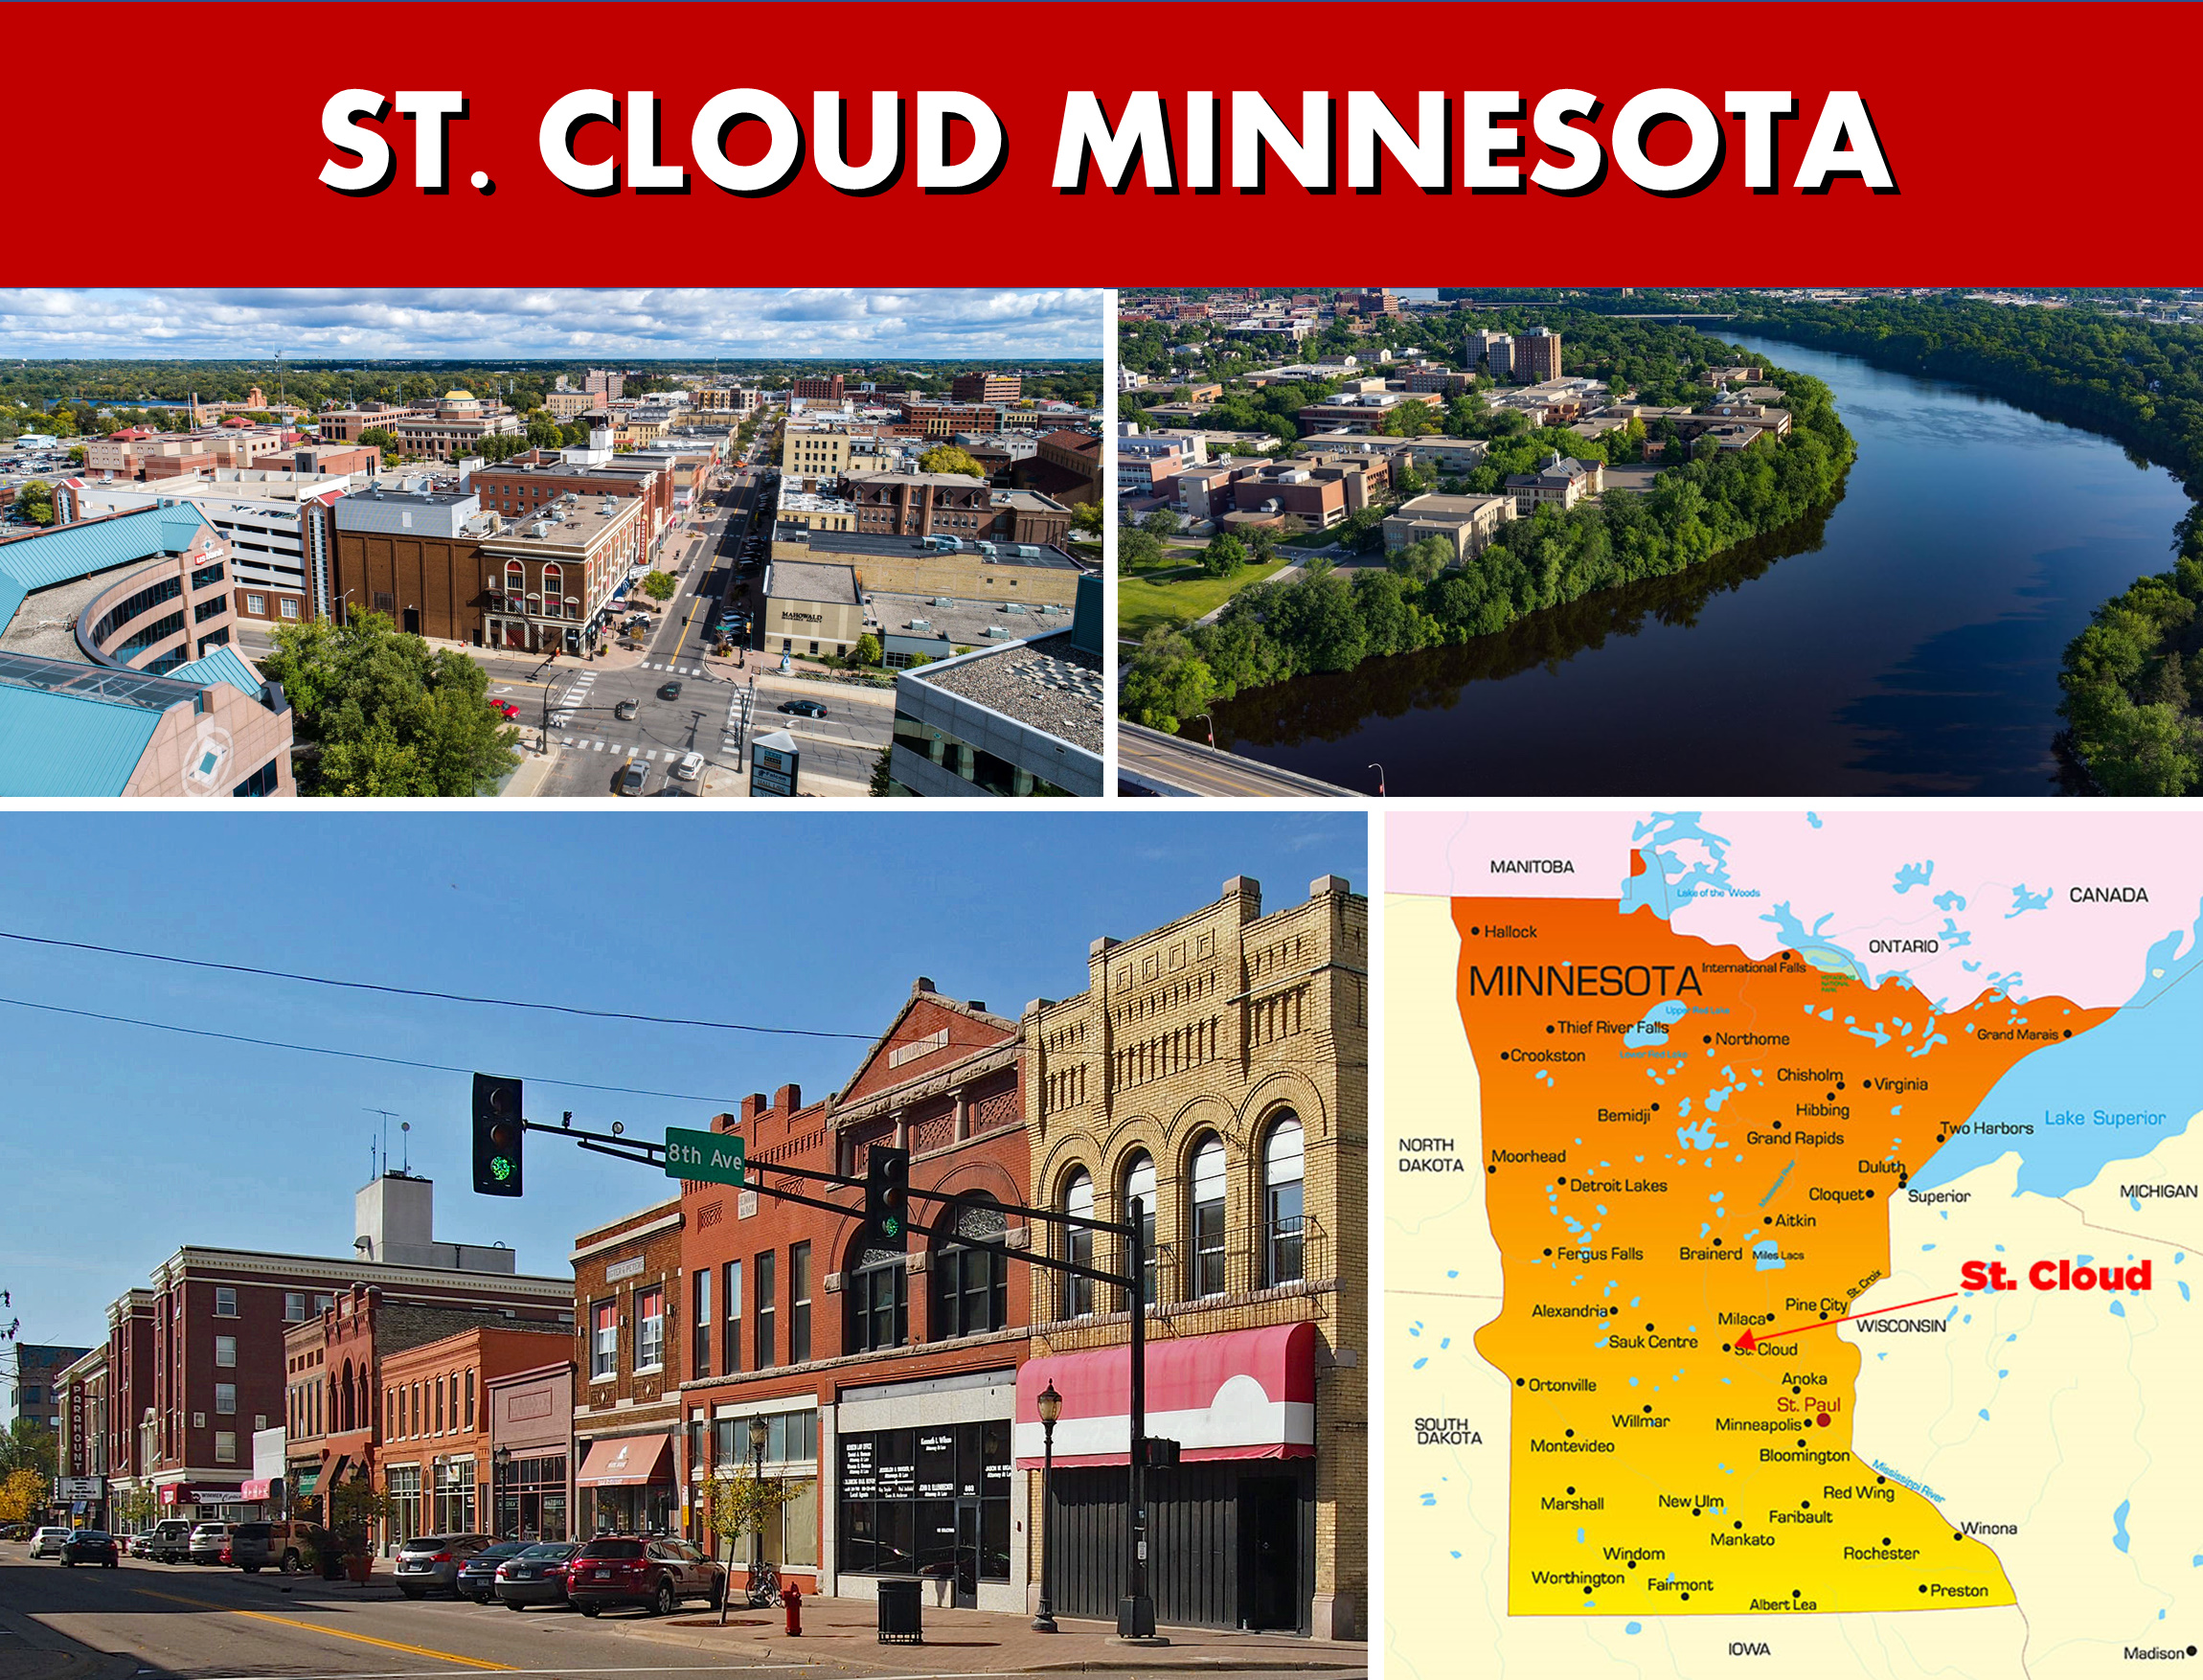 St. Cloud to Minneapolis and Minneapolis to St. Cloud - Private